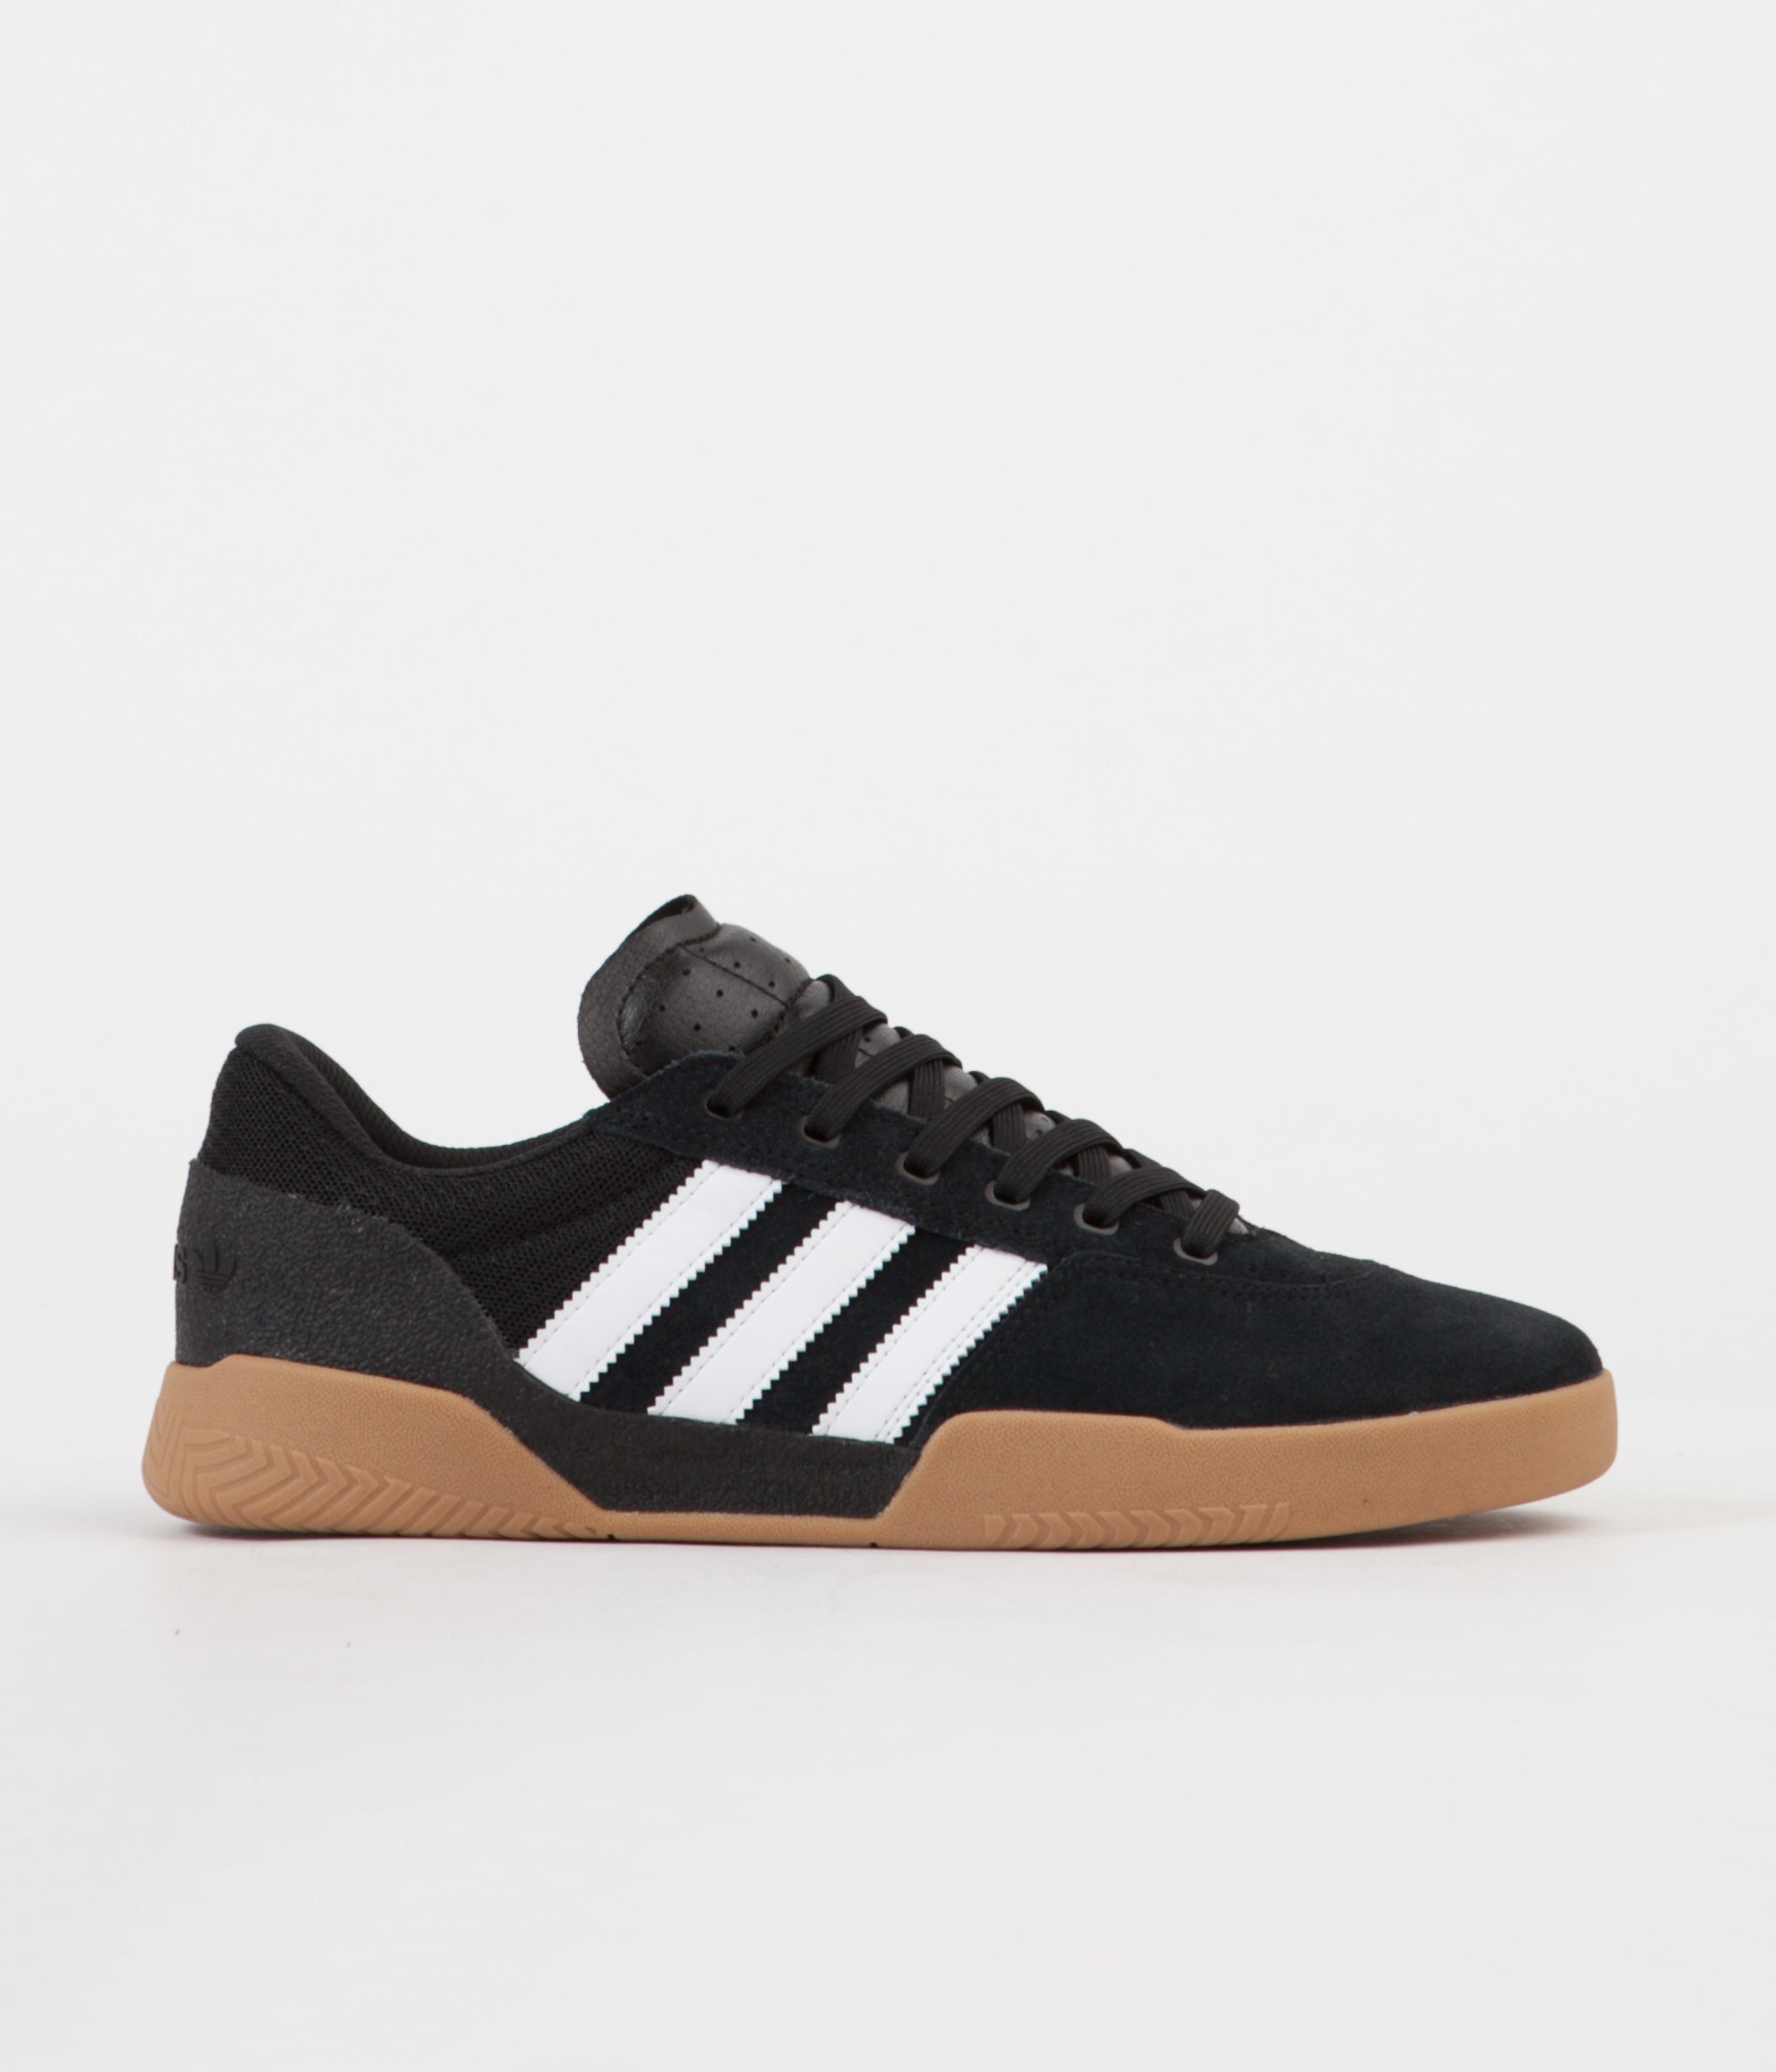 adidas city cup shoes black